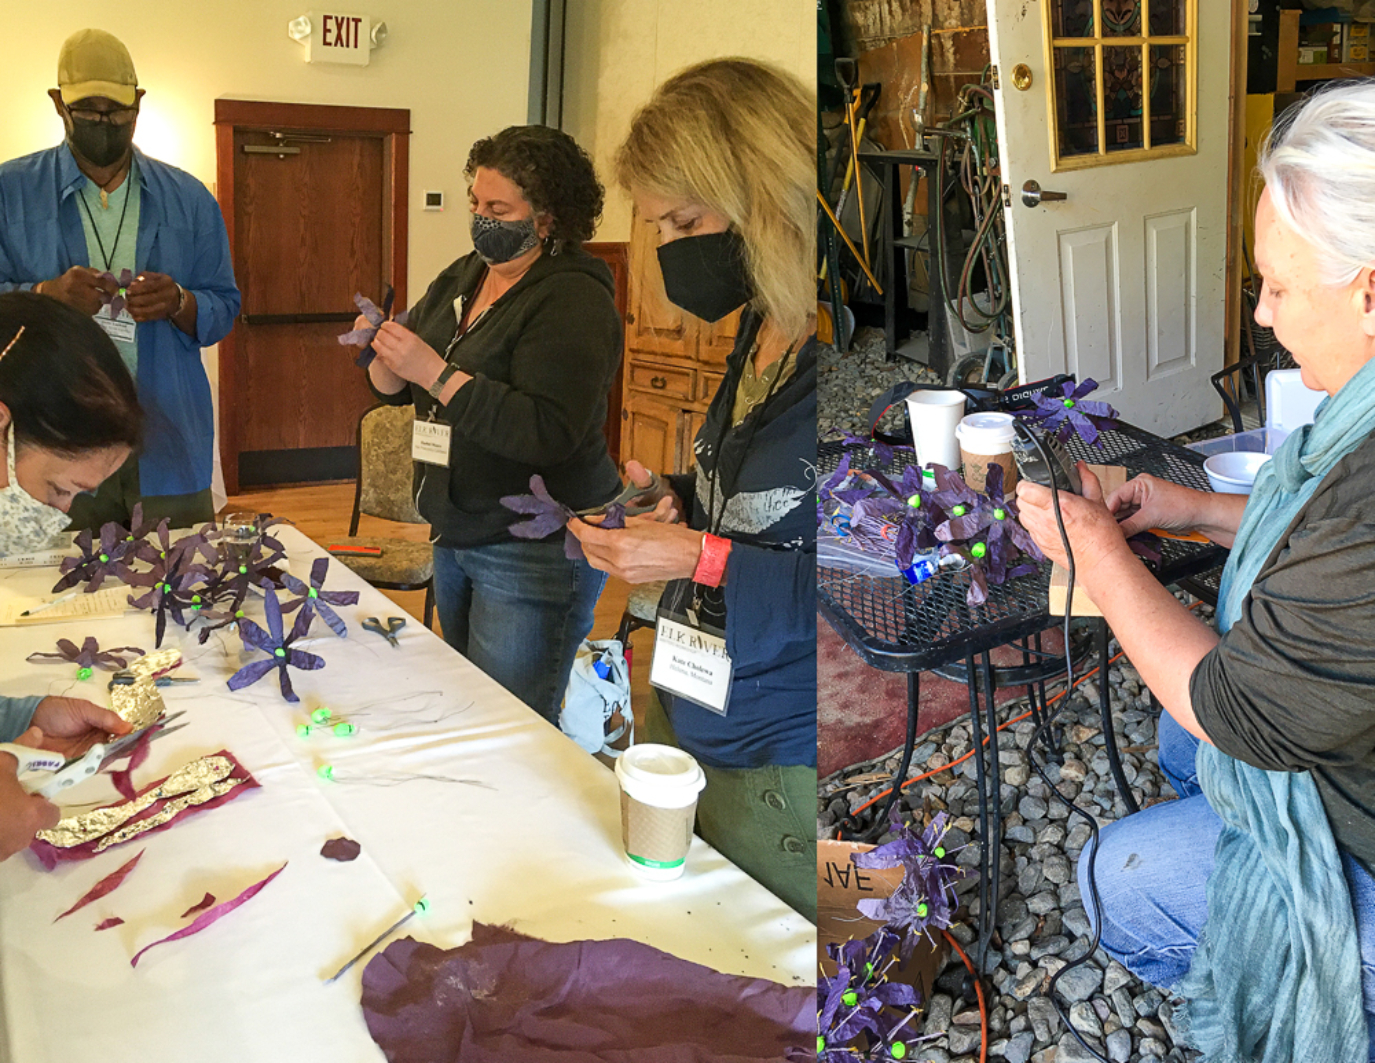 This is split image of volunteers at the Elk River Writers workshop helping to put together the Dream Puppet. Four folks in the left panel (including workshop leader J. Drew Lanham) and one elder lady seated in the right frame, smiling, and putting together purple flowers.